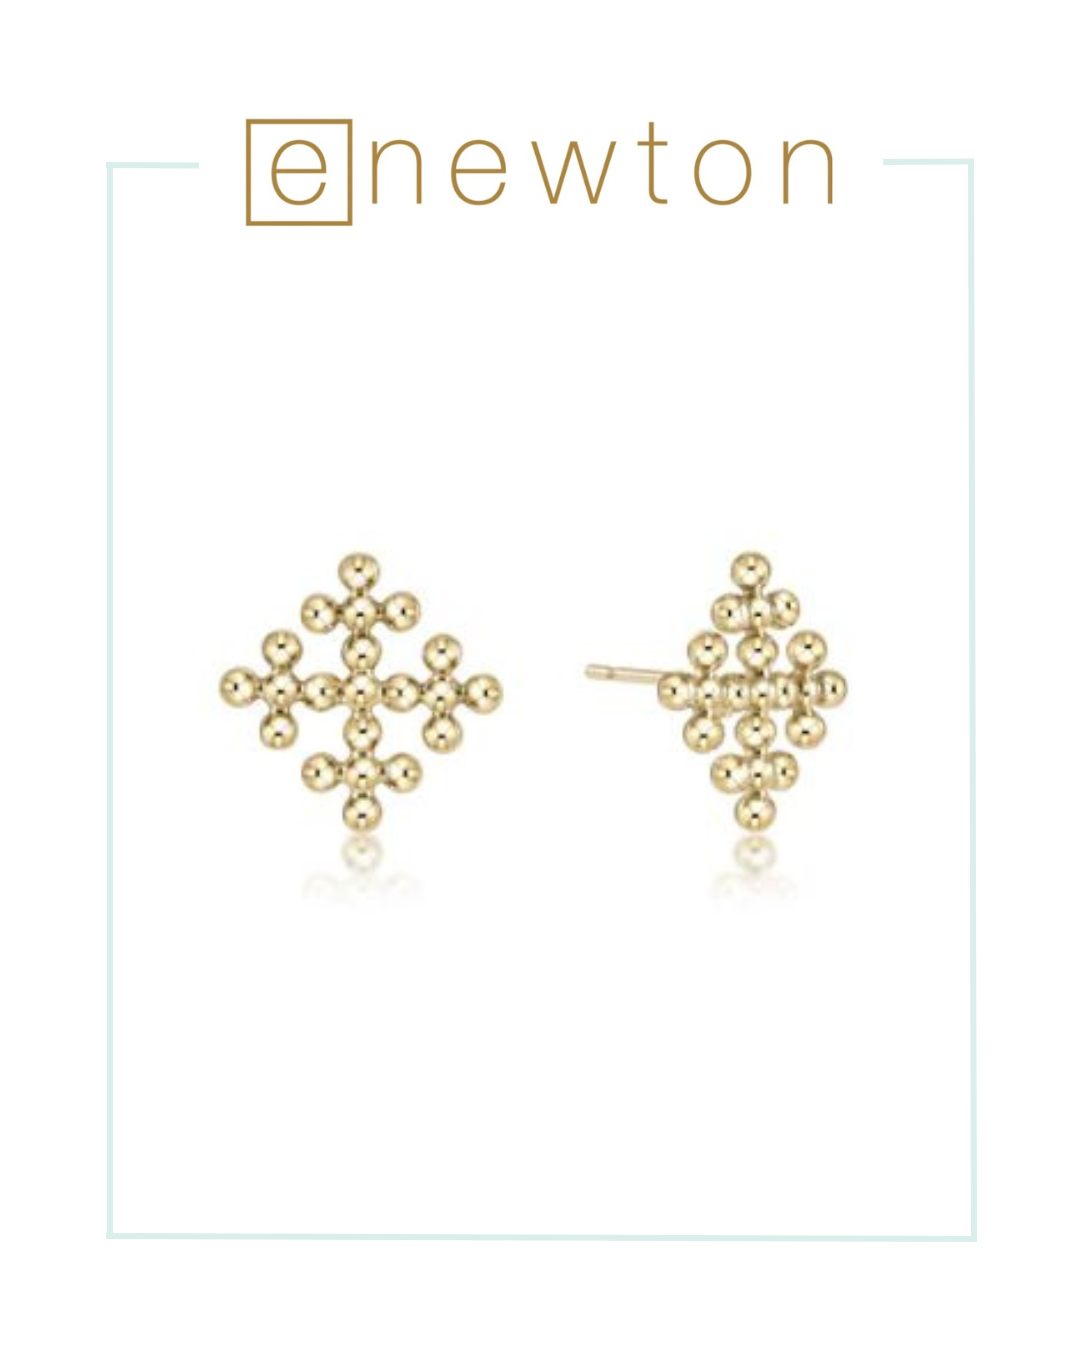 E Newton Classic Beaded Signature Cross Encompass Stud - Gold-Earrings-ENEWTON-The Village Shoppe, Women’s Fashion Boutique, Shop Online and In Store - Located in Muscle Shoals, AL.